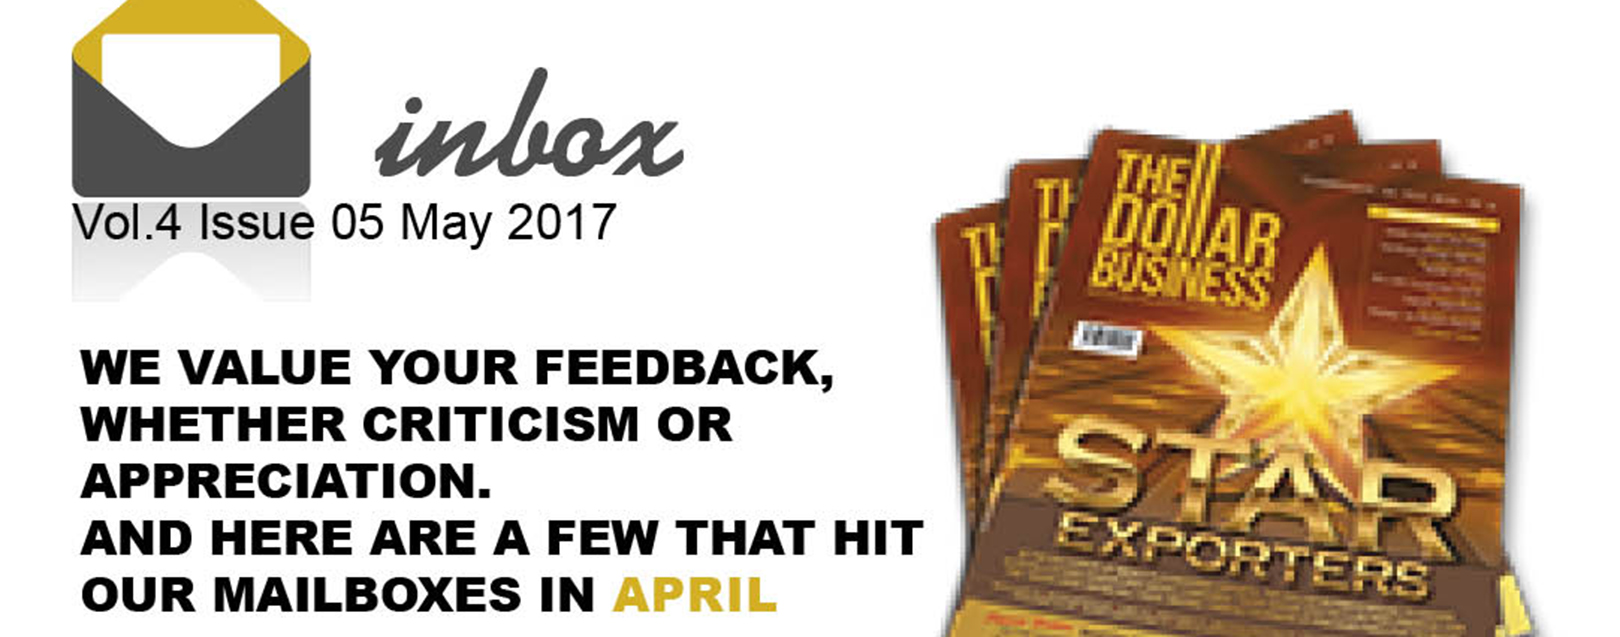 INBOX May 2017 March 2018 issue